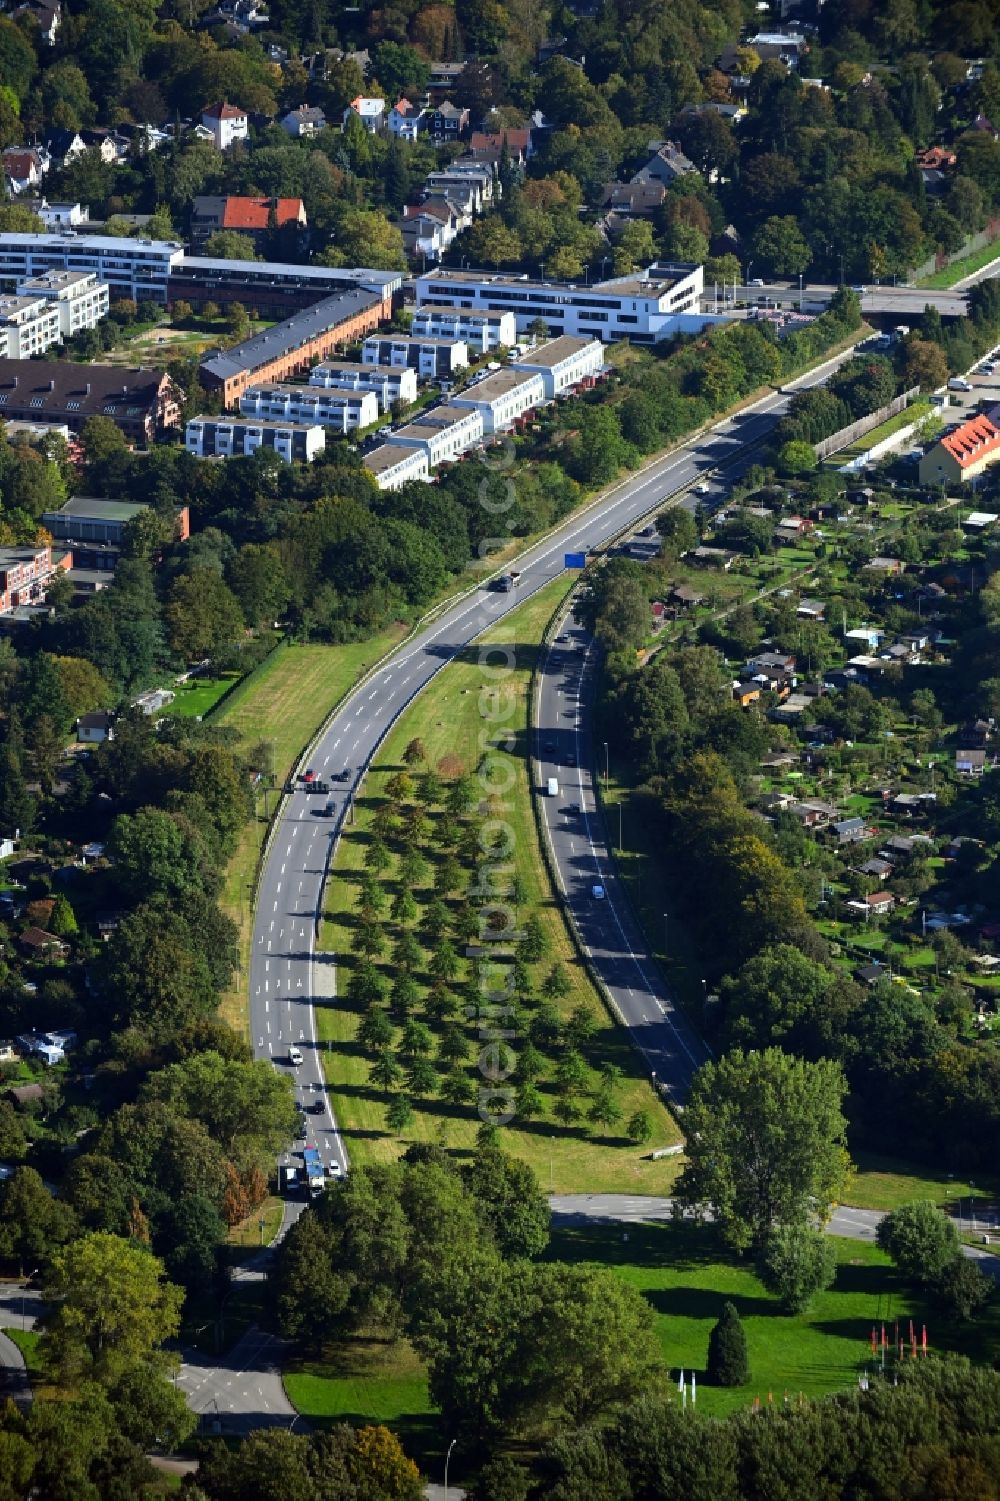 Aerial image Hamburg - Renaturation through afforestation of young trees in the forest area at the roundabout - the Horner roundabout and the end of the A24 motorway in Hamburg, Germany